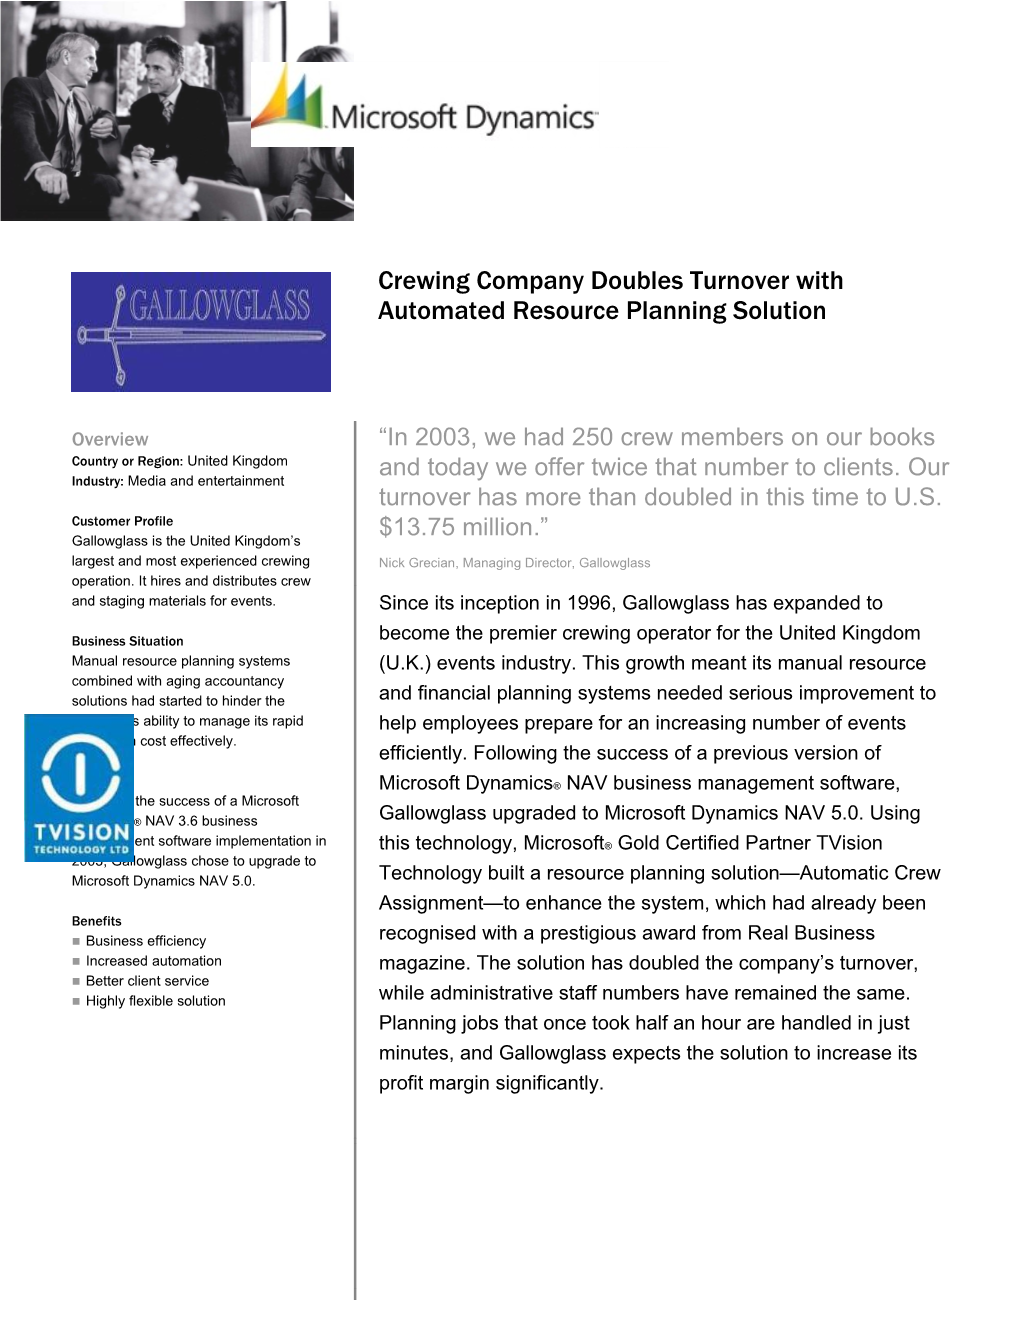 Writeimage CEP Crewing Company Doubles Turnover with Automated Resource Planning Solution